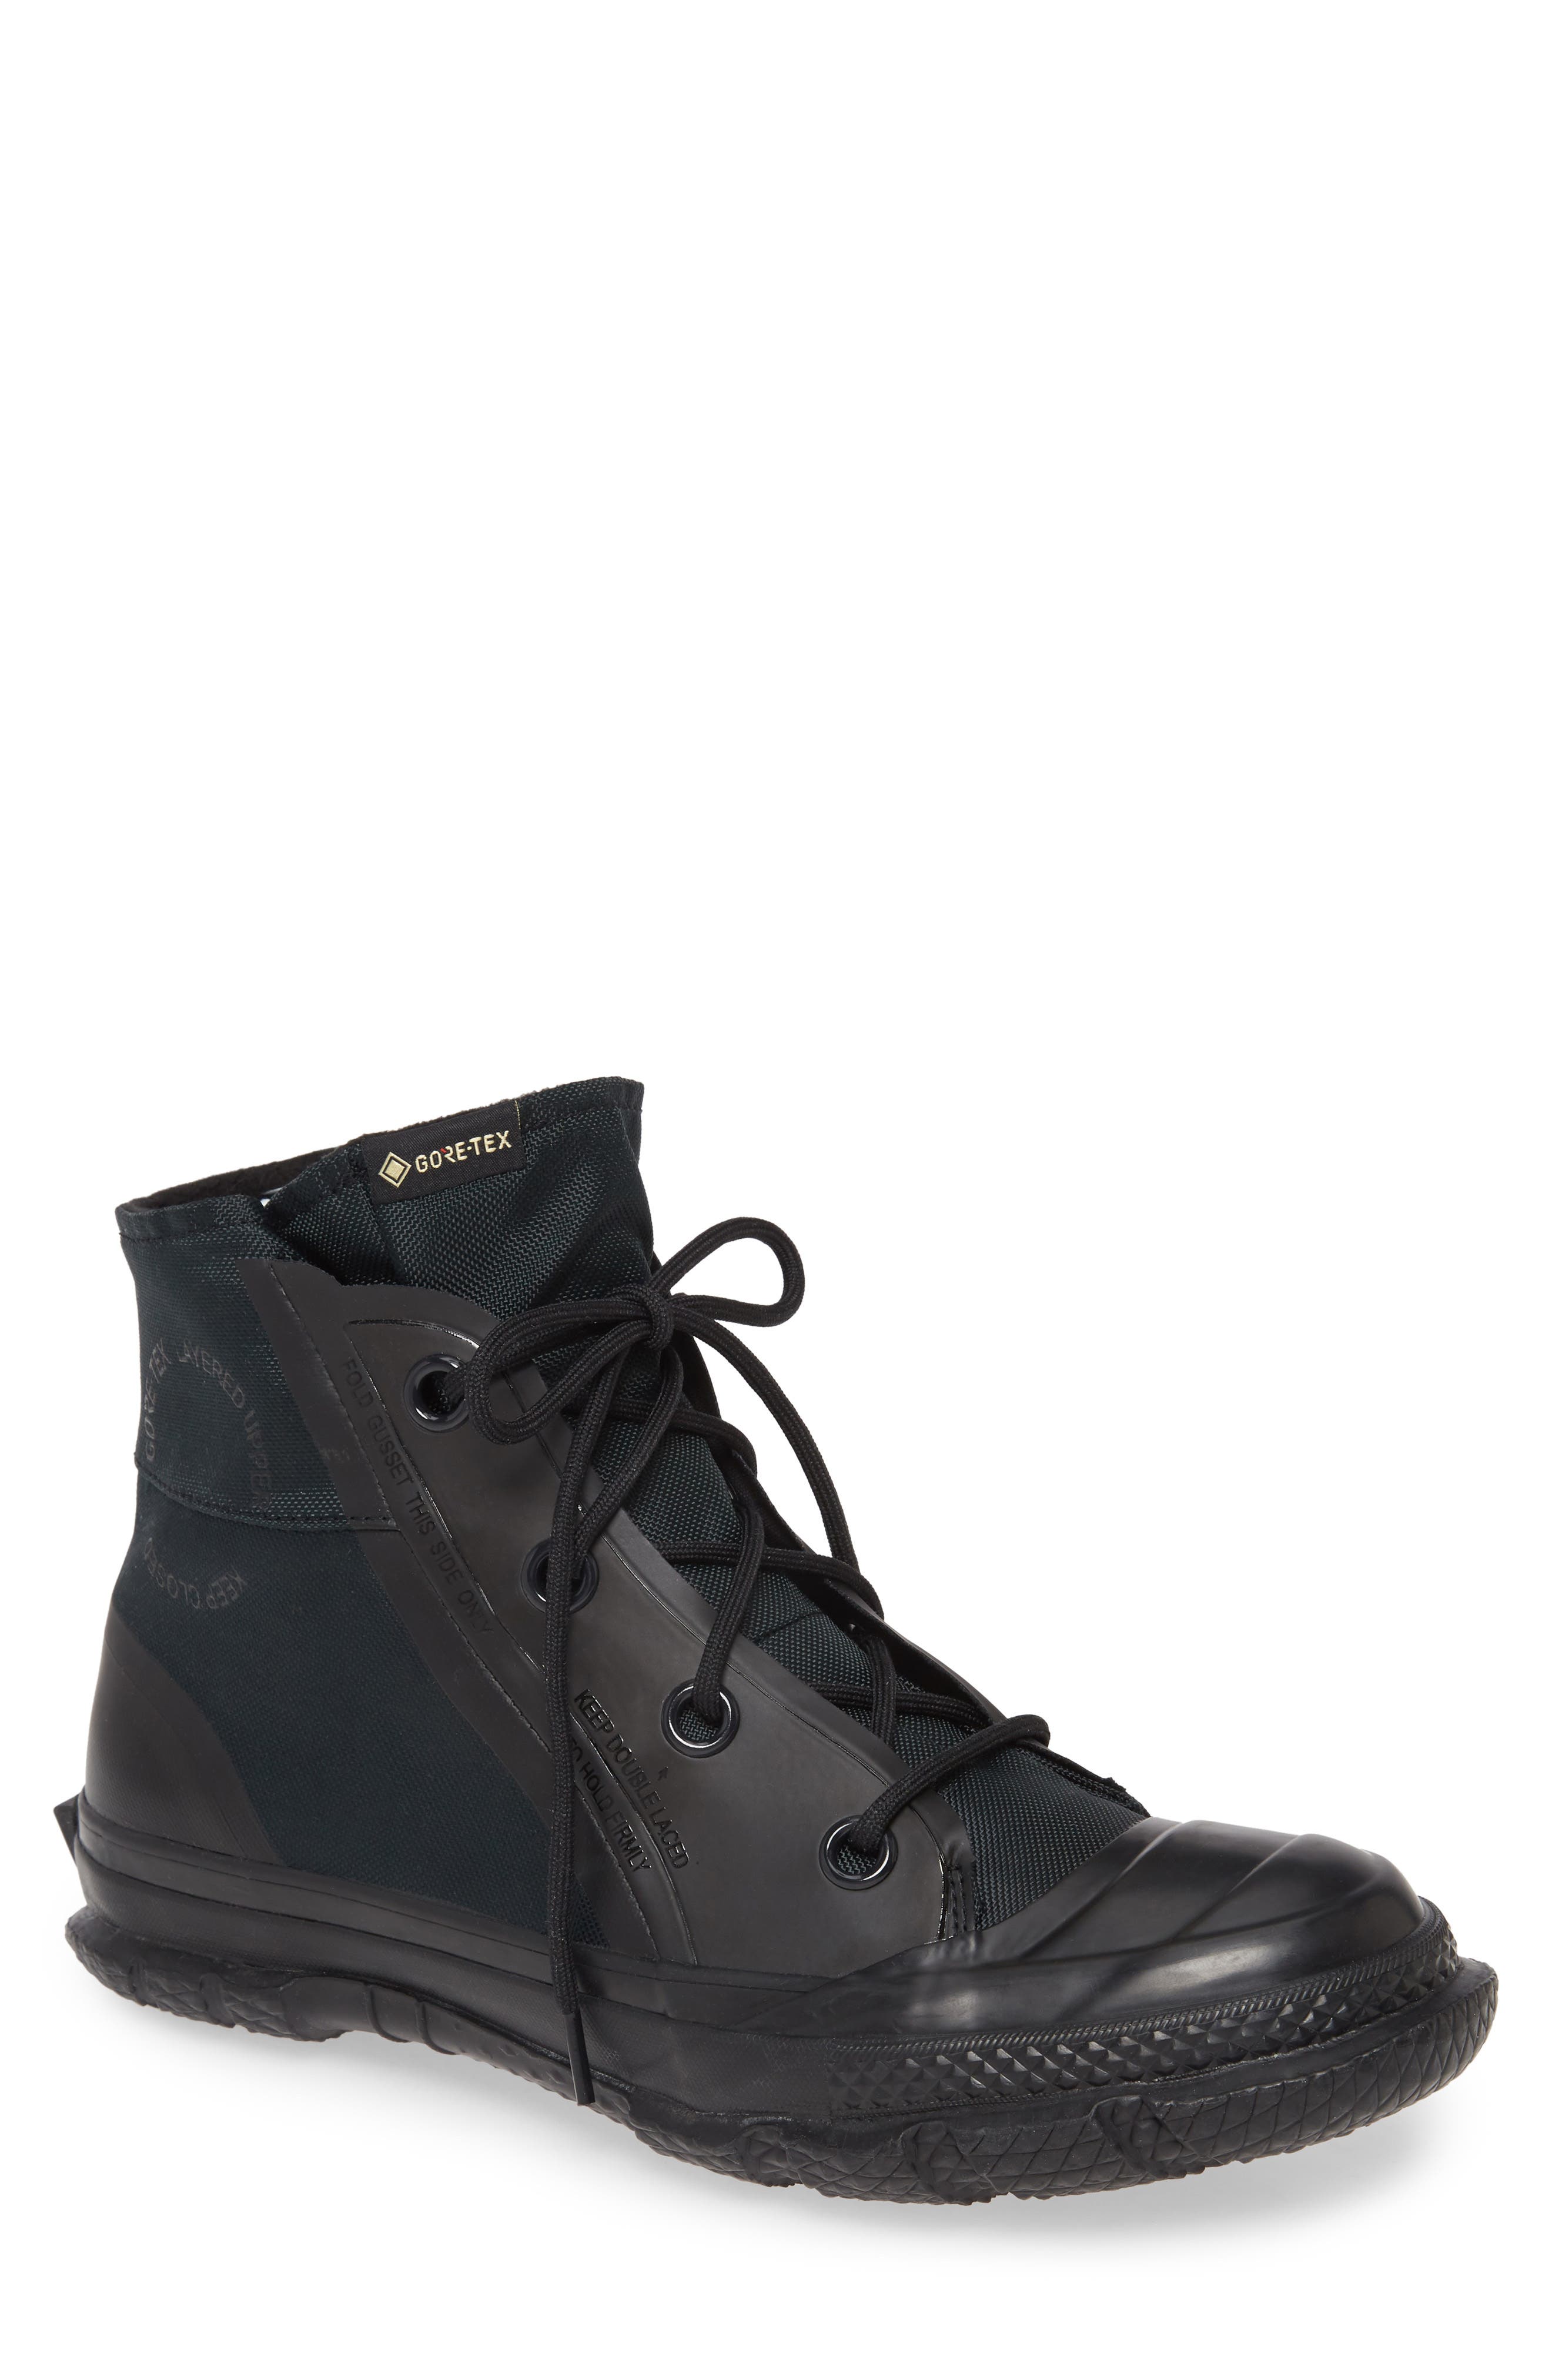 converse work boots for men